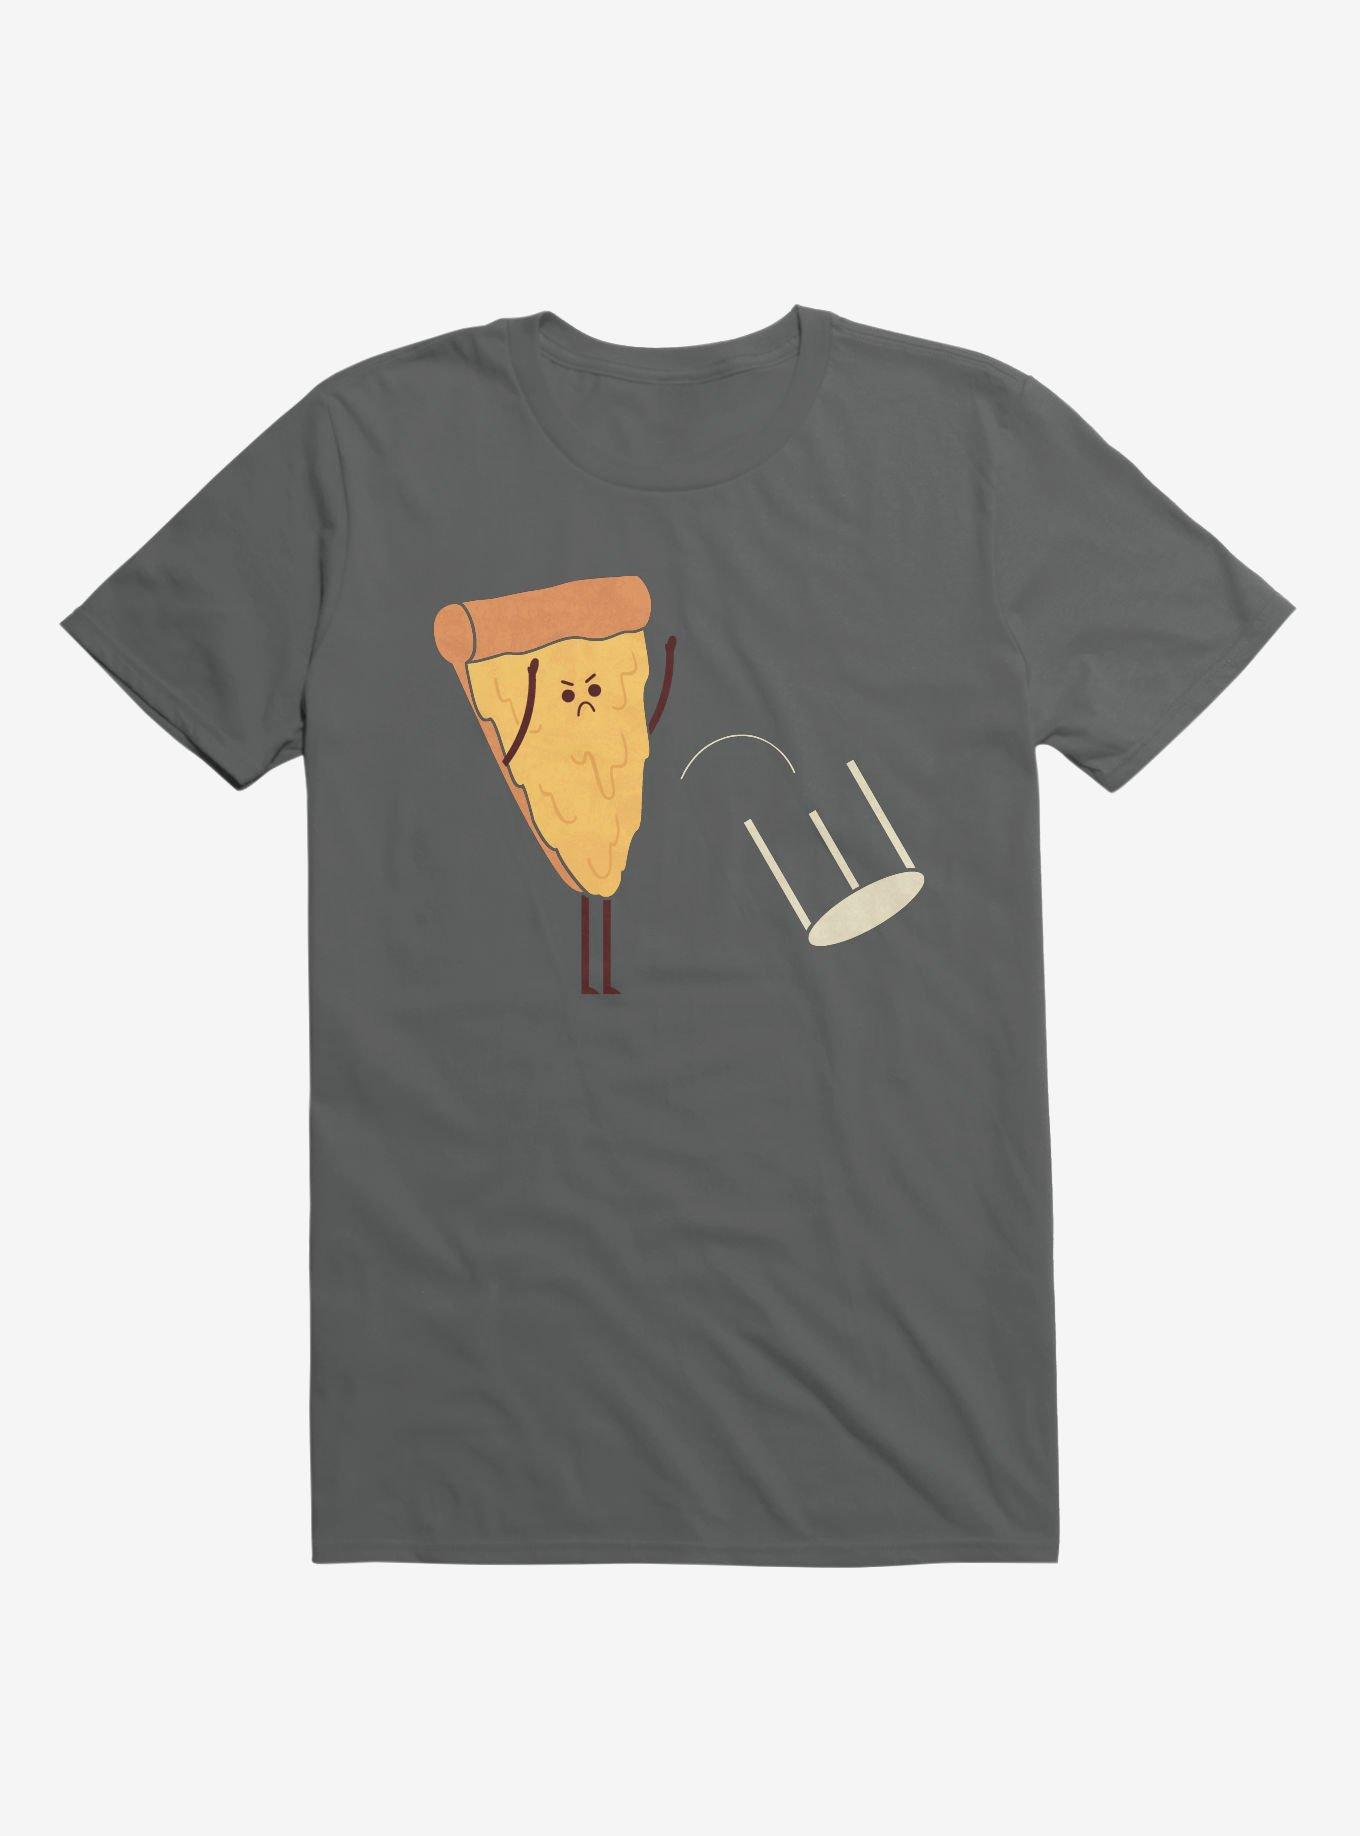 Angry Pizza Flips Table Charcoal Grey T-Shirt